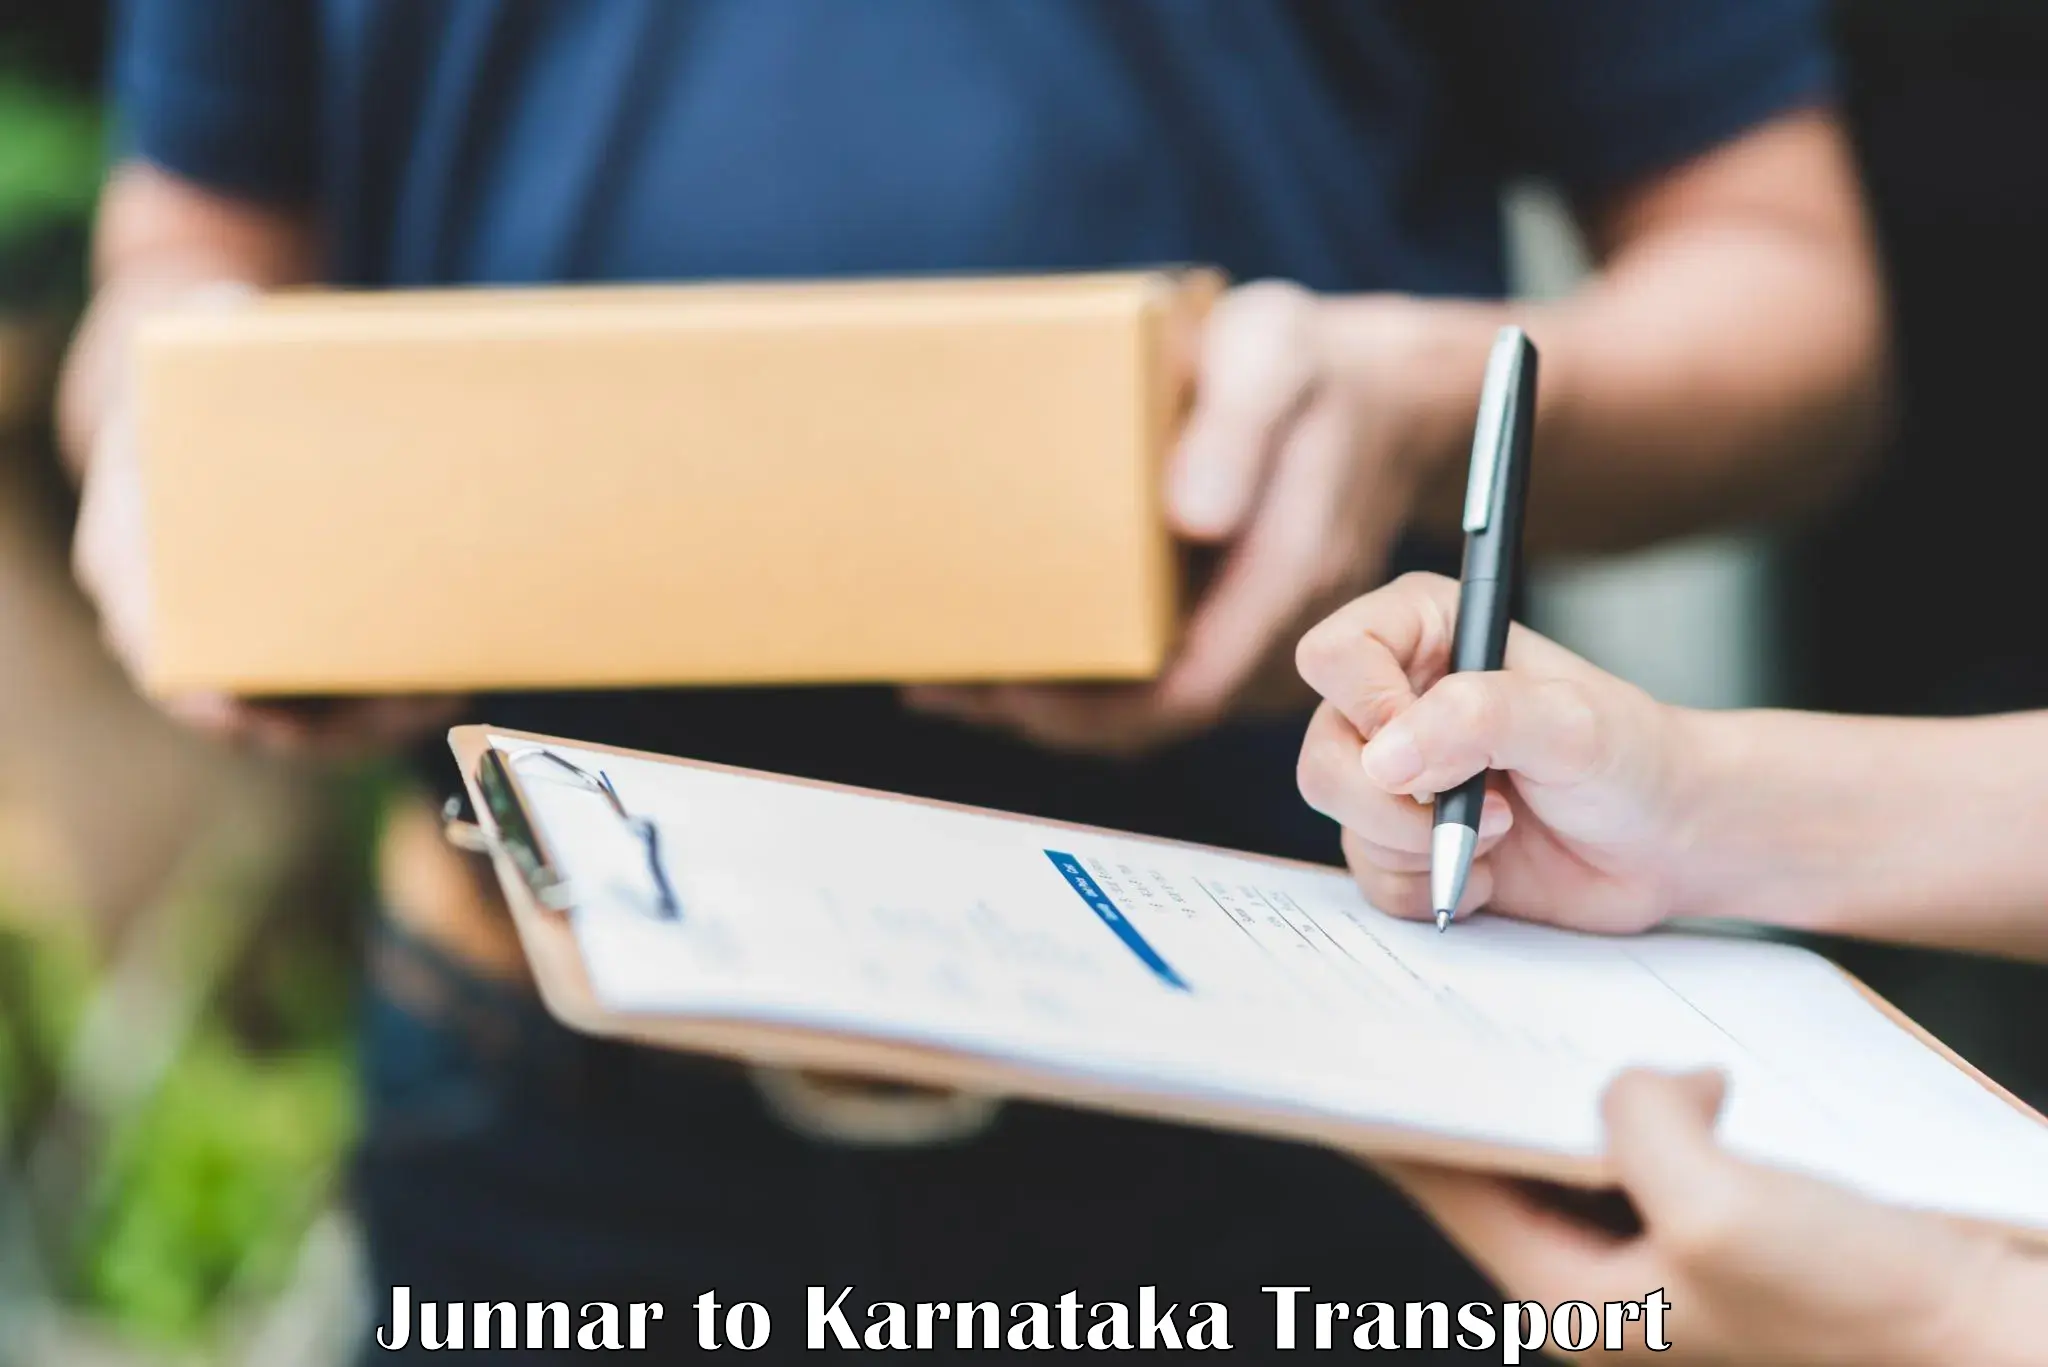 Container transport service Junnar to Surathkal